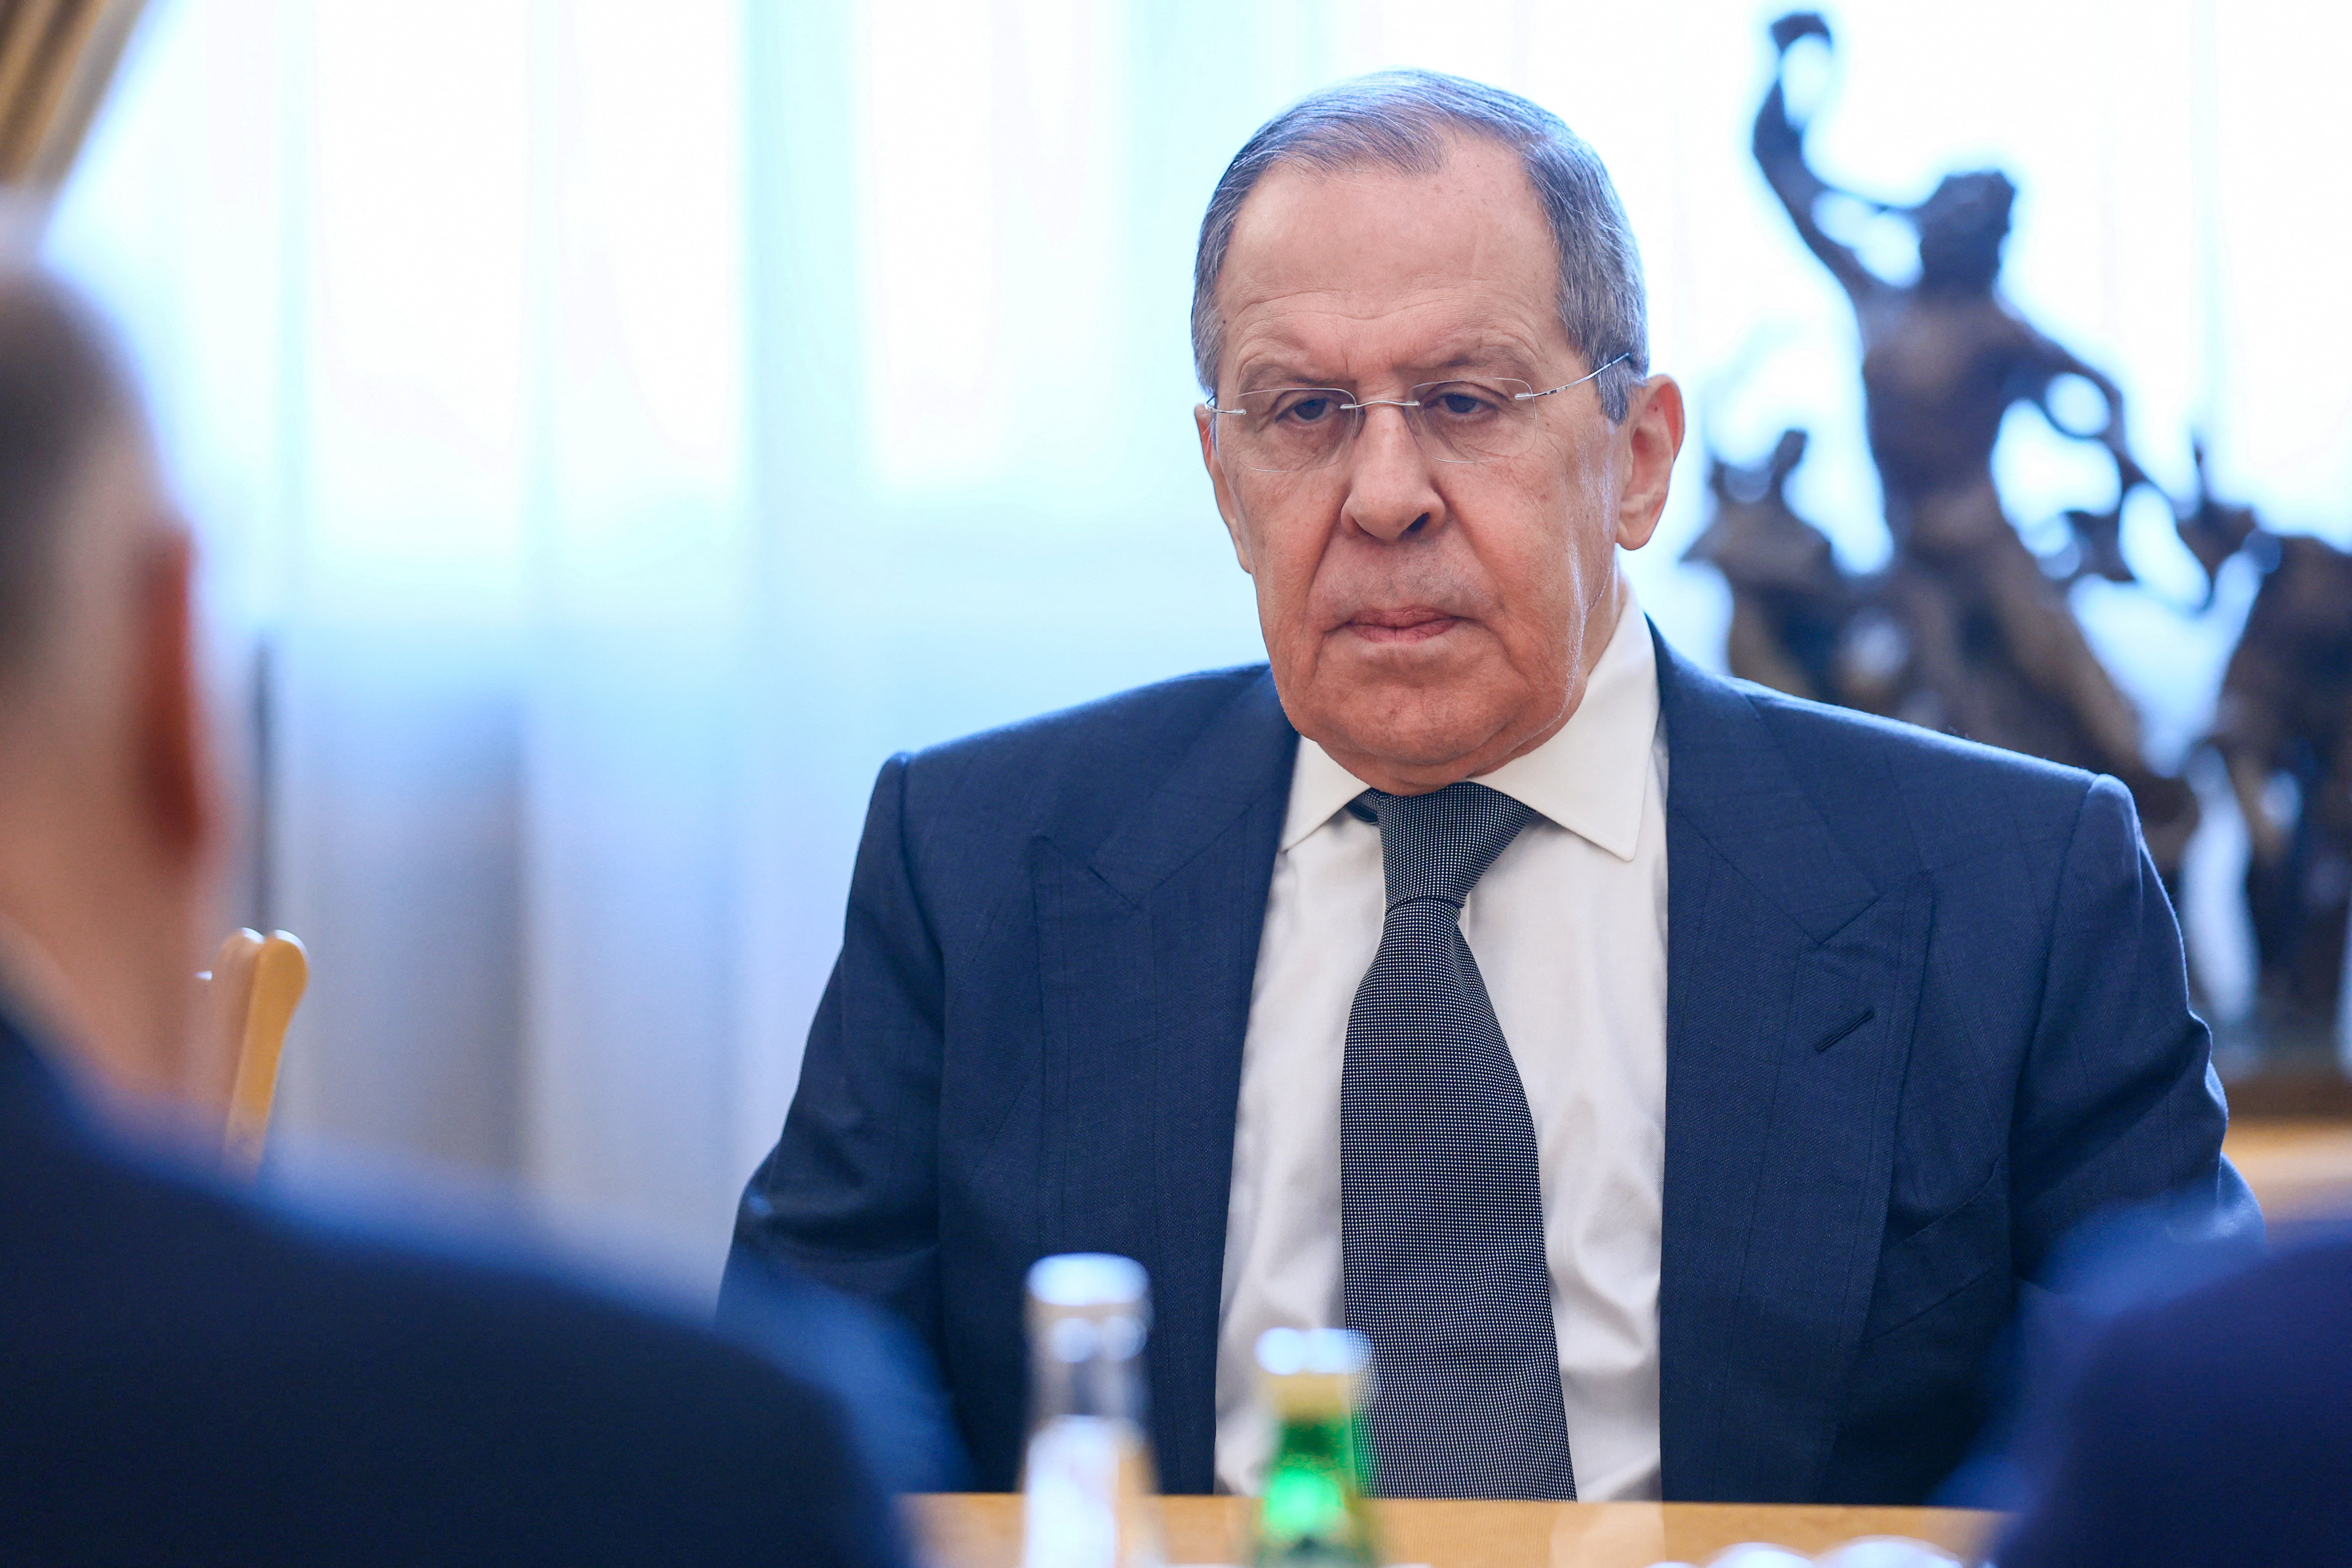 Russia's Foreign Minister Lavrov meets with President of Georgia's breakaway region of Abkhazia Bzhaniya in Moscow